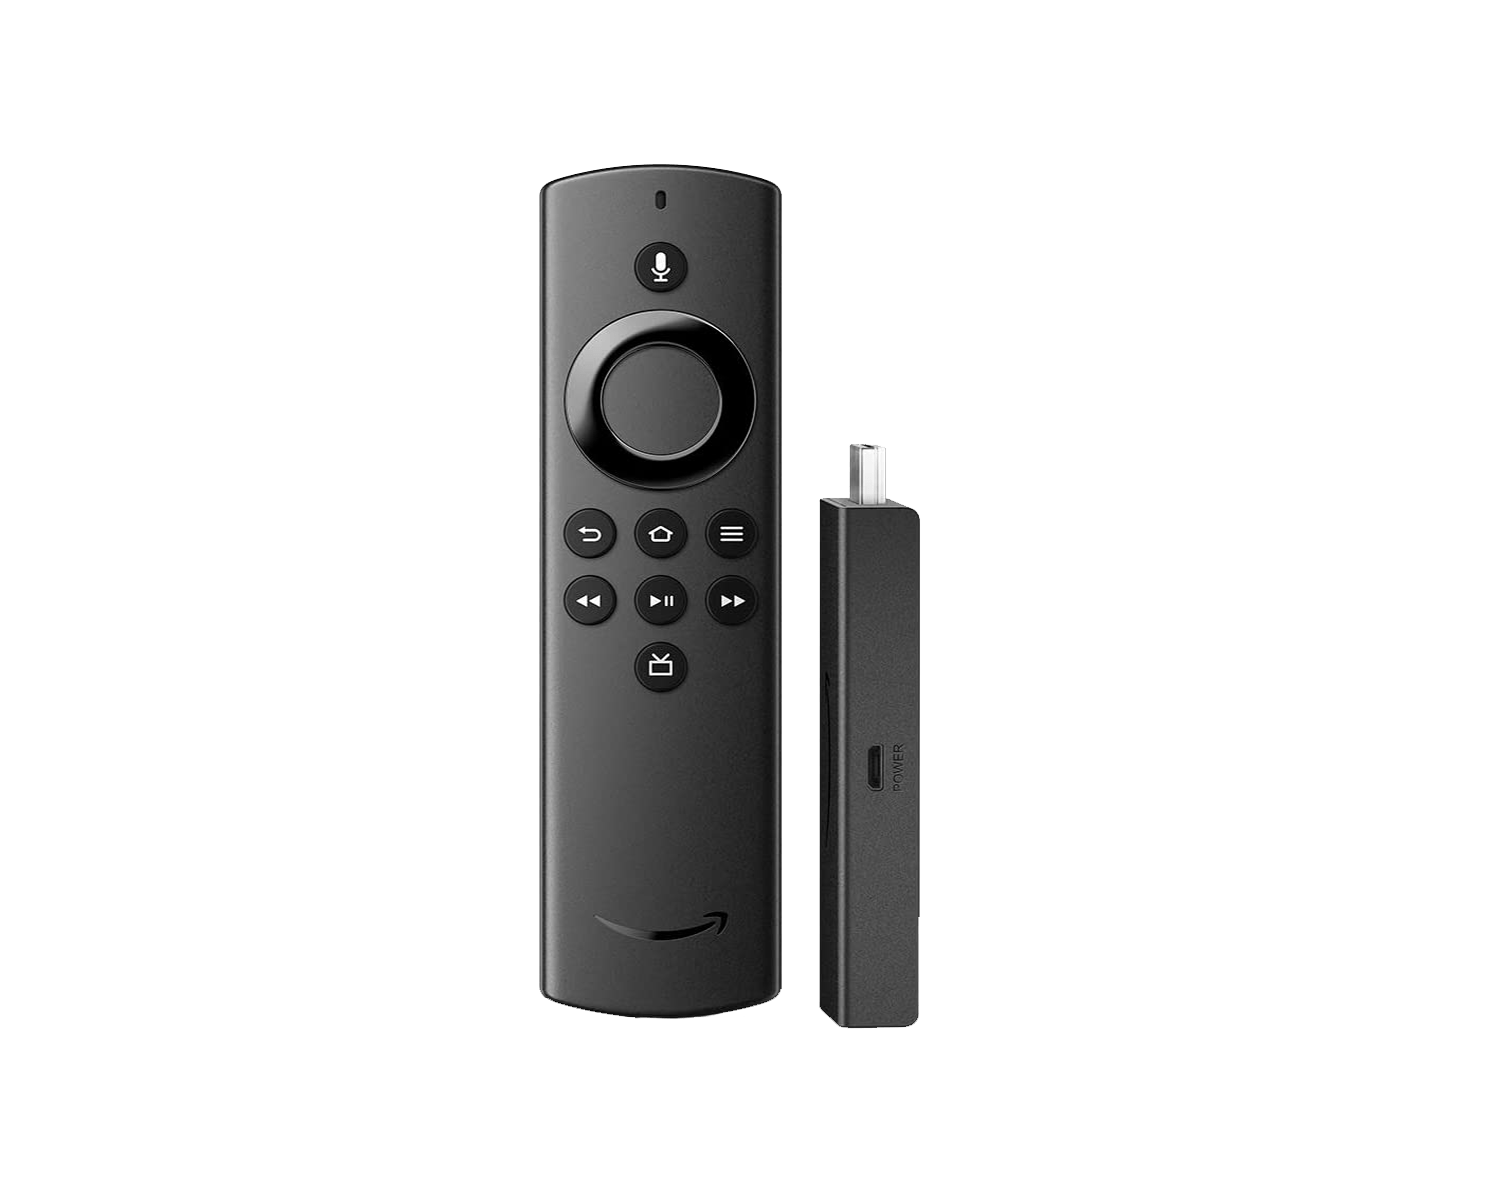 Fire TV Stick 4K streaming device with Alexa / Voice Remote - SESCO STORE